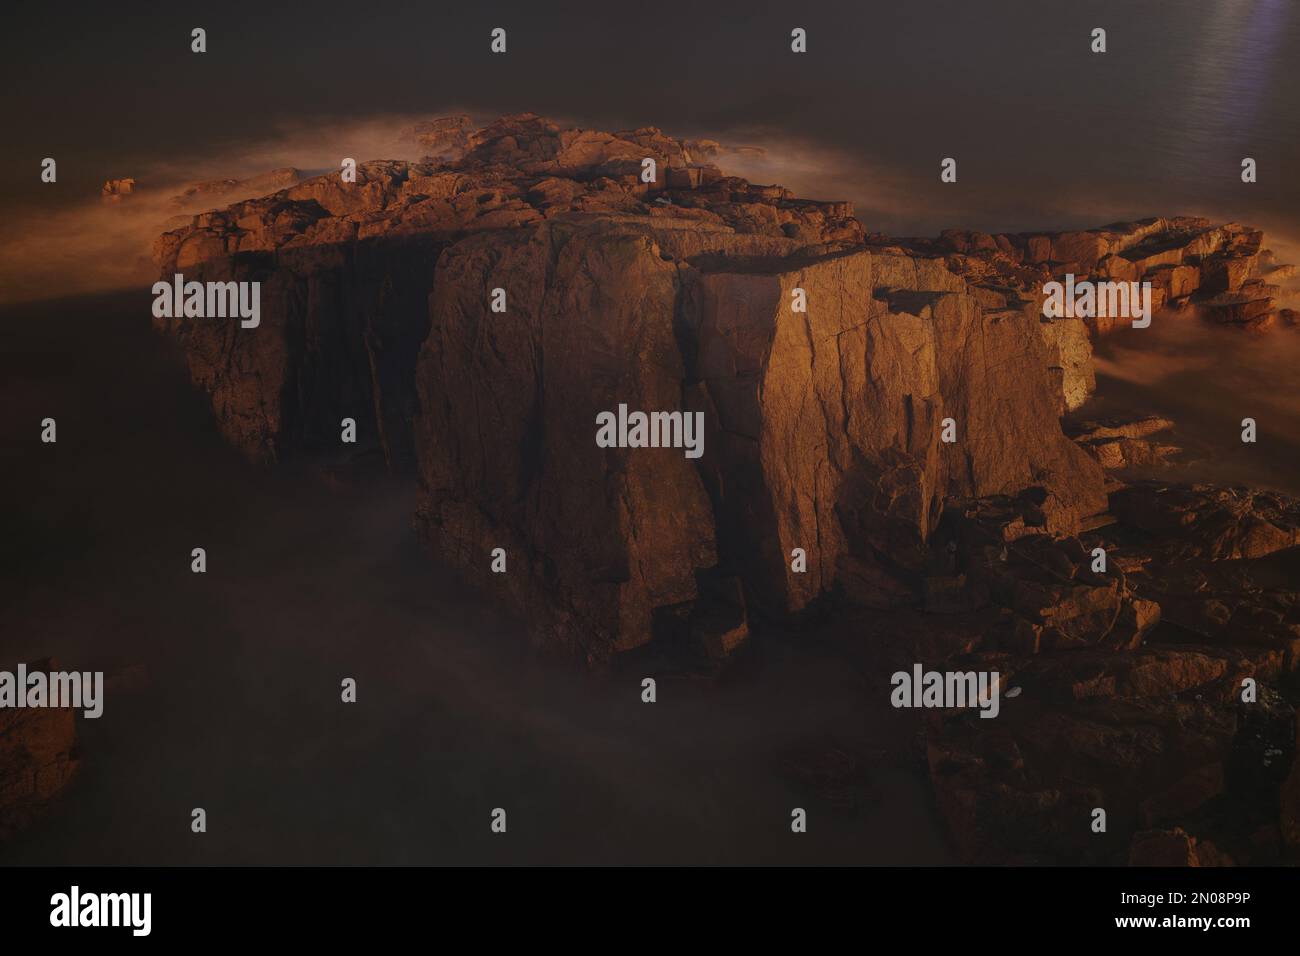 time-lapse photography of rocks at night Stock Photo